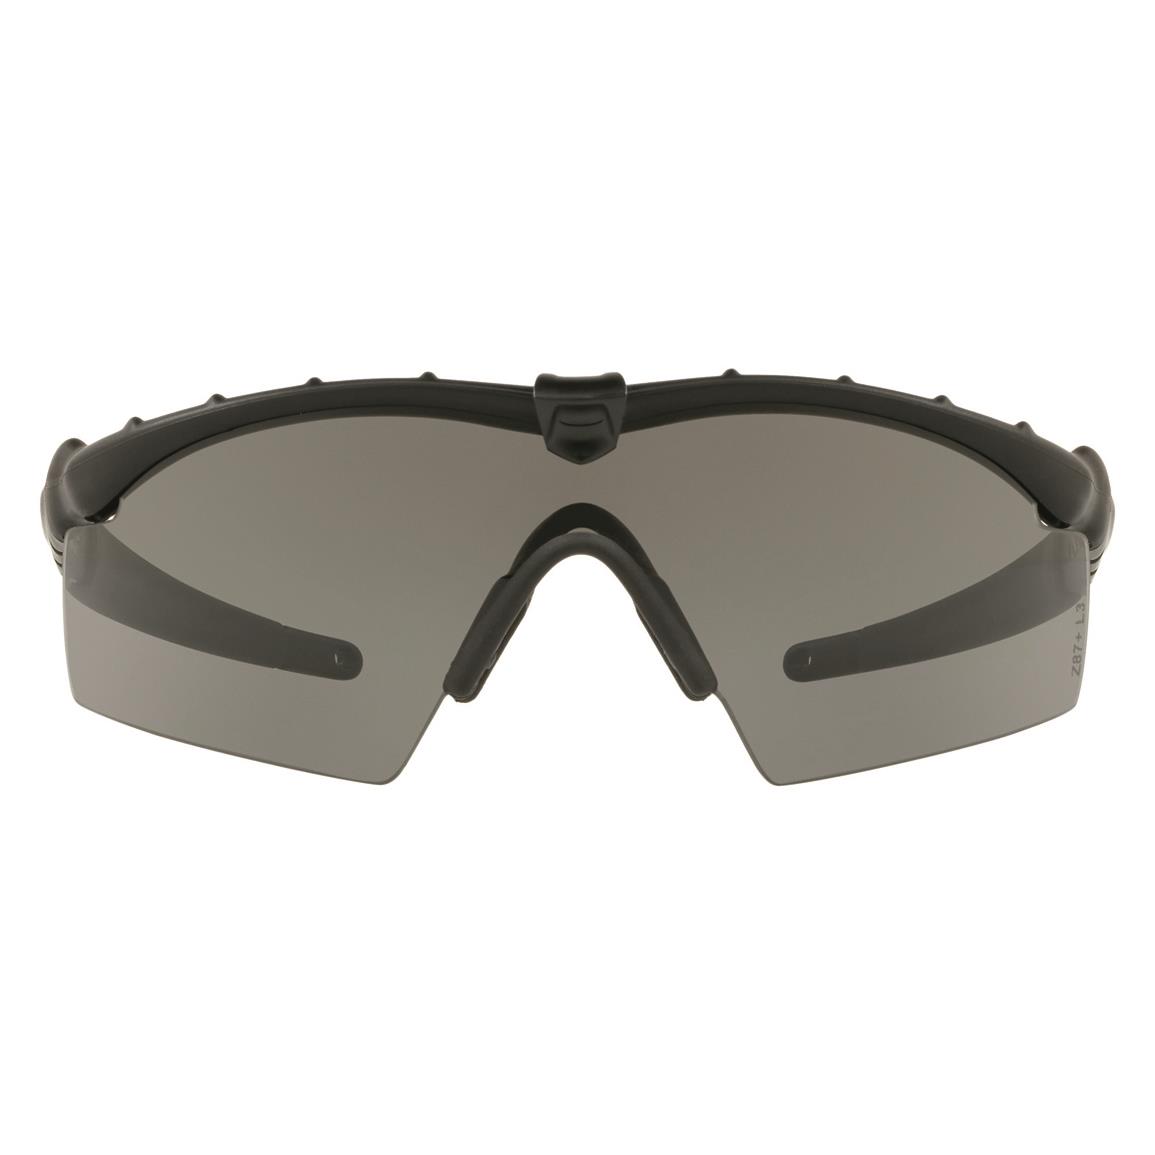 Oakley Industrial M Frame 2 0 Safety Glasses 707668 Sunglasses And Eyewear At Sportsman S Guide